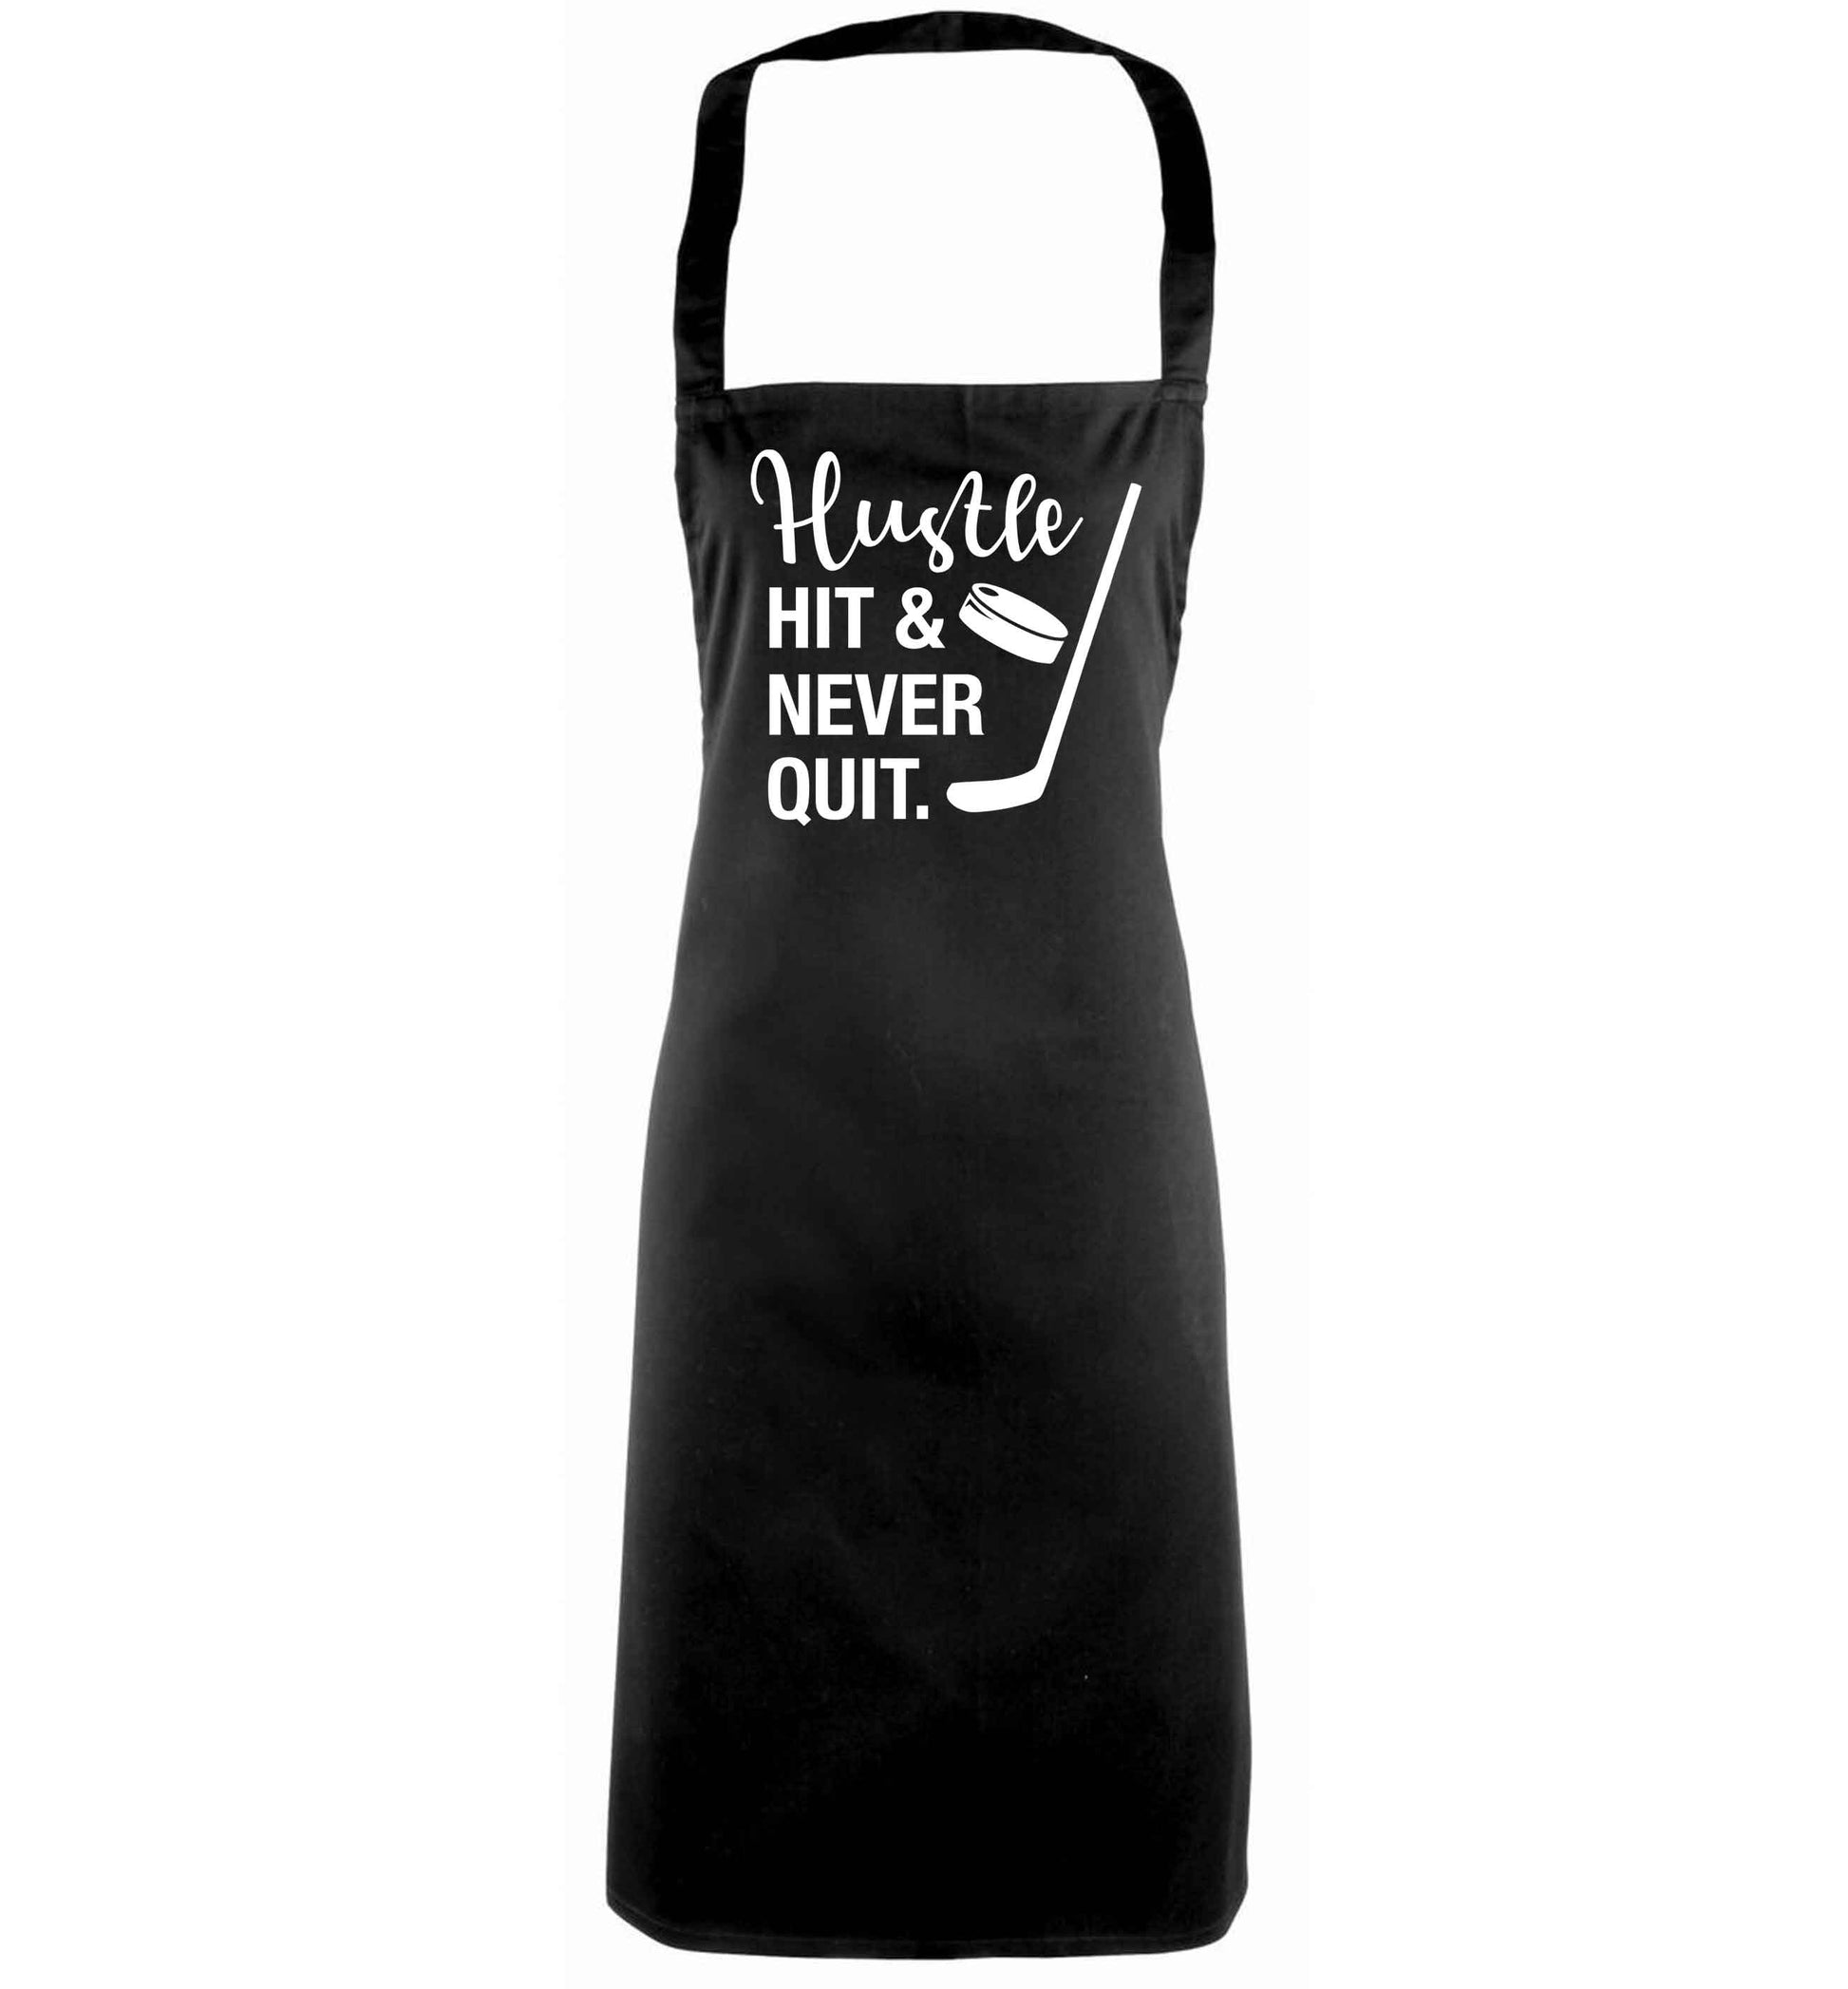 Hustle hit and never quit black apron